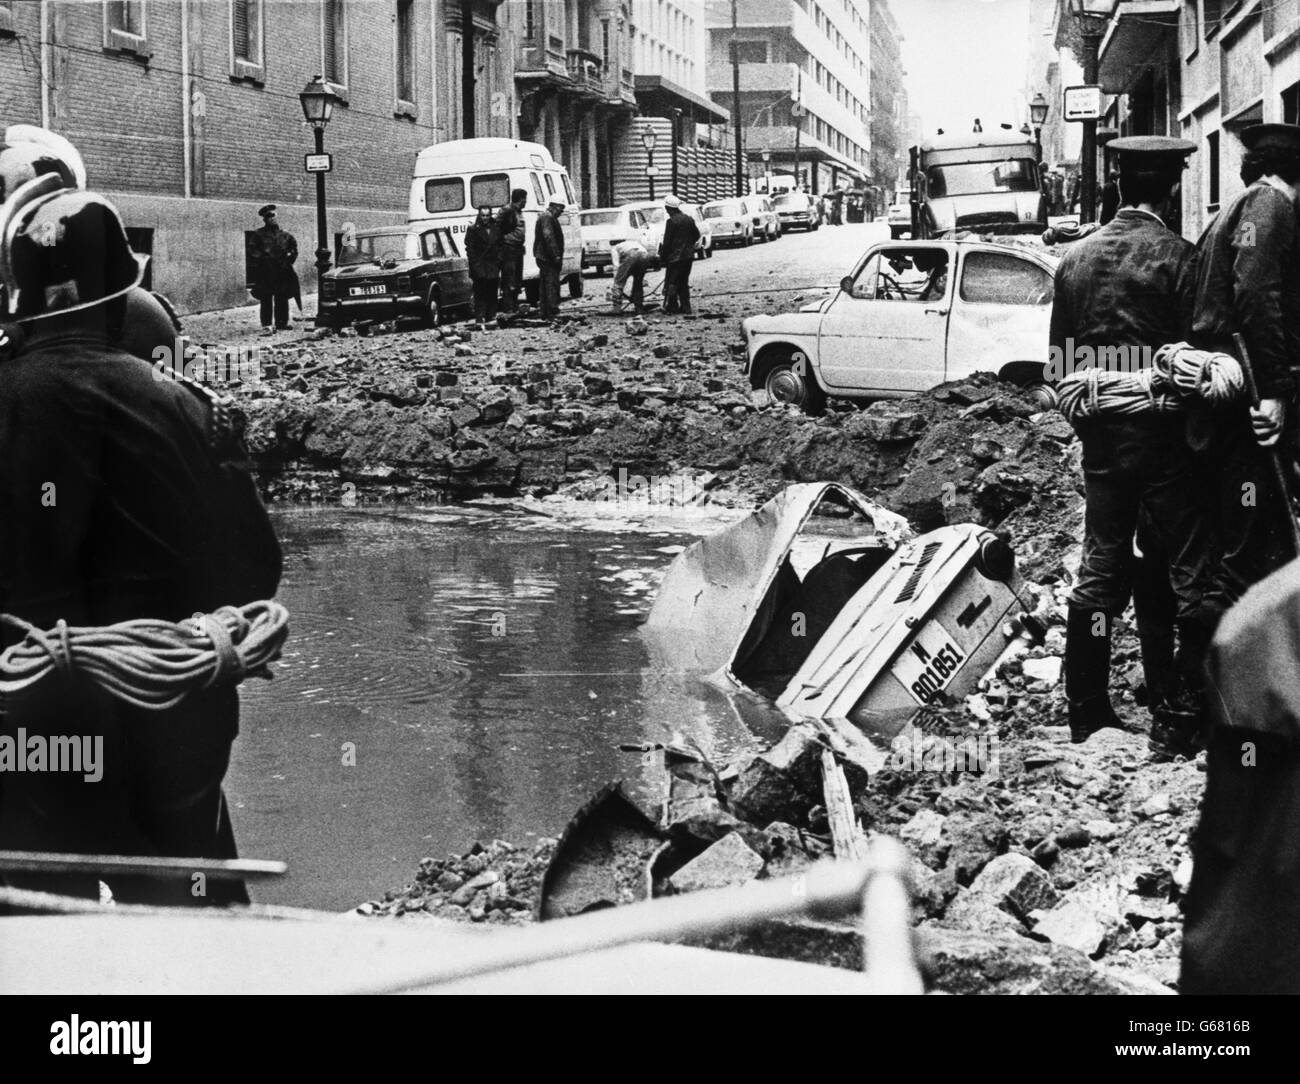 The Devastated Scene In Madrid After An Explosion That Killed The Spanish Prime Minister Admiral Luis Carrero Blanco When The Eta Detonated Explosives Under His Passing Vehicle On A Madrid Street As